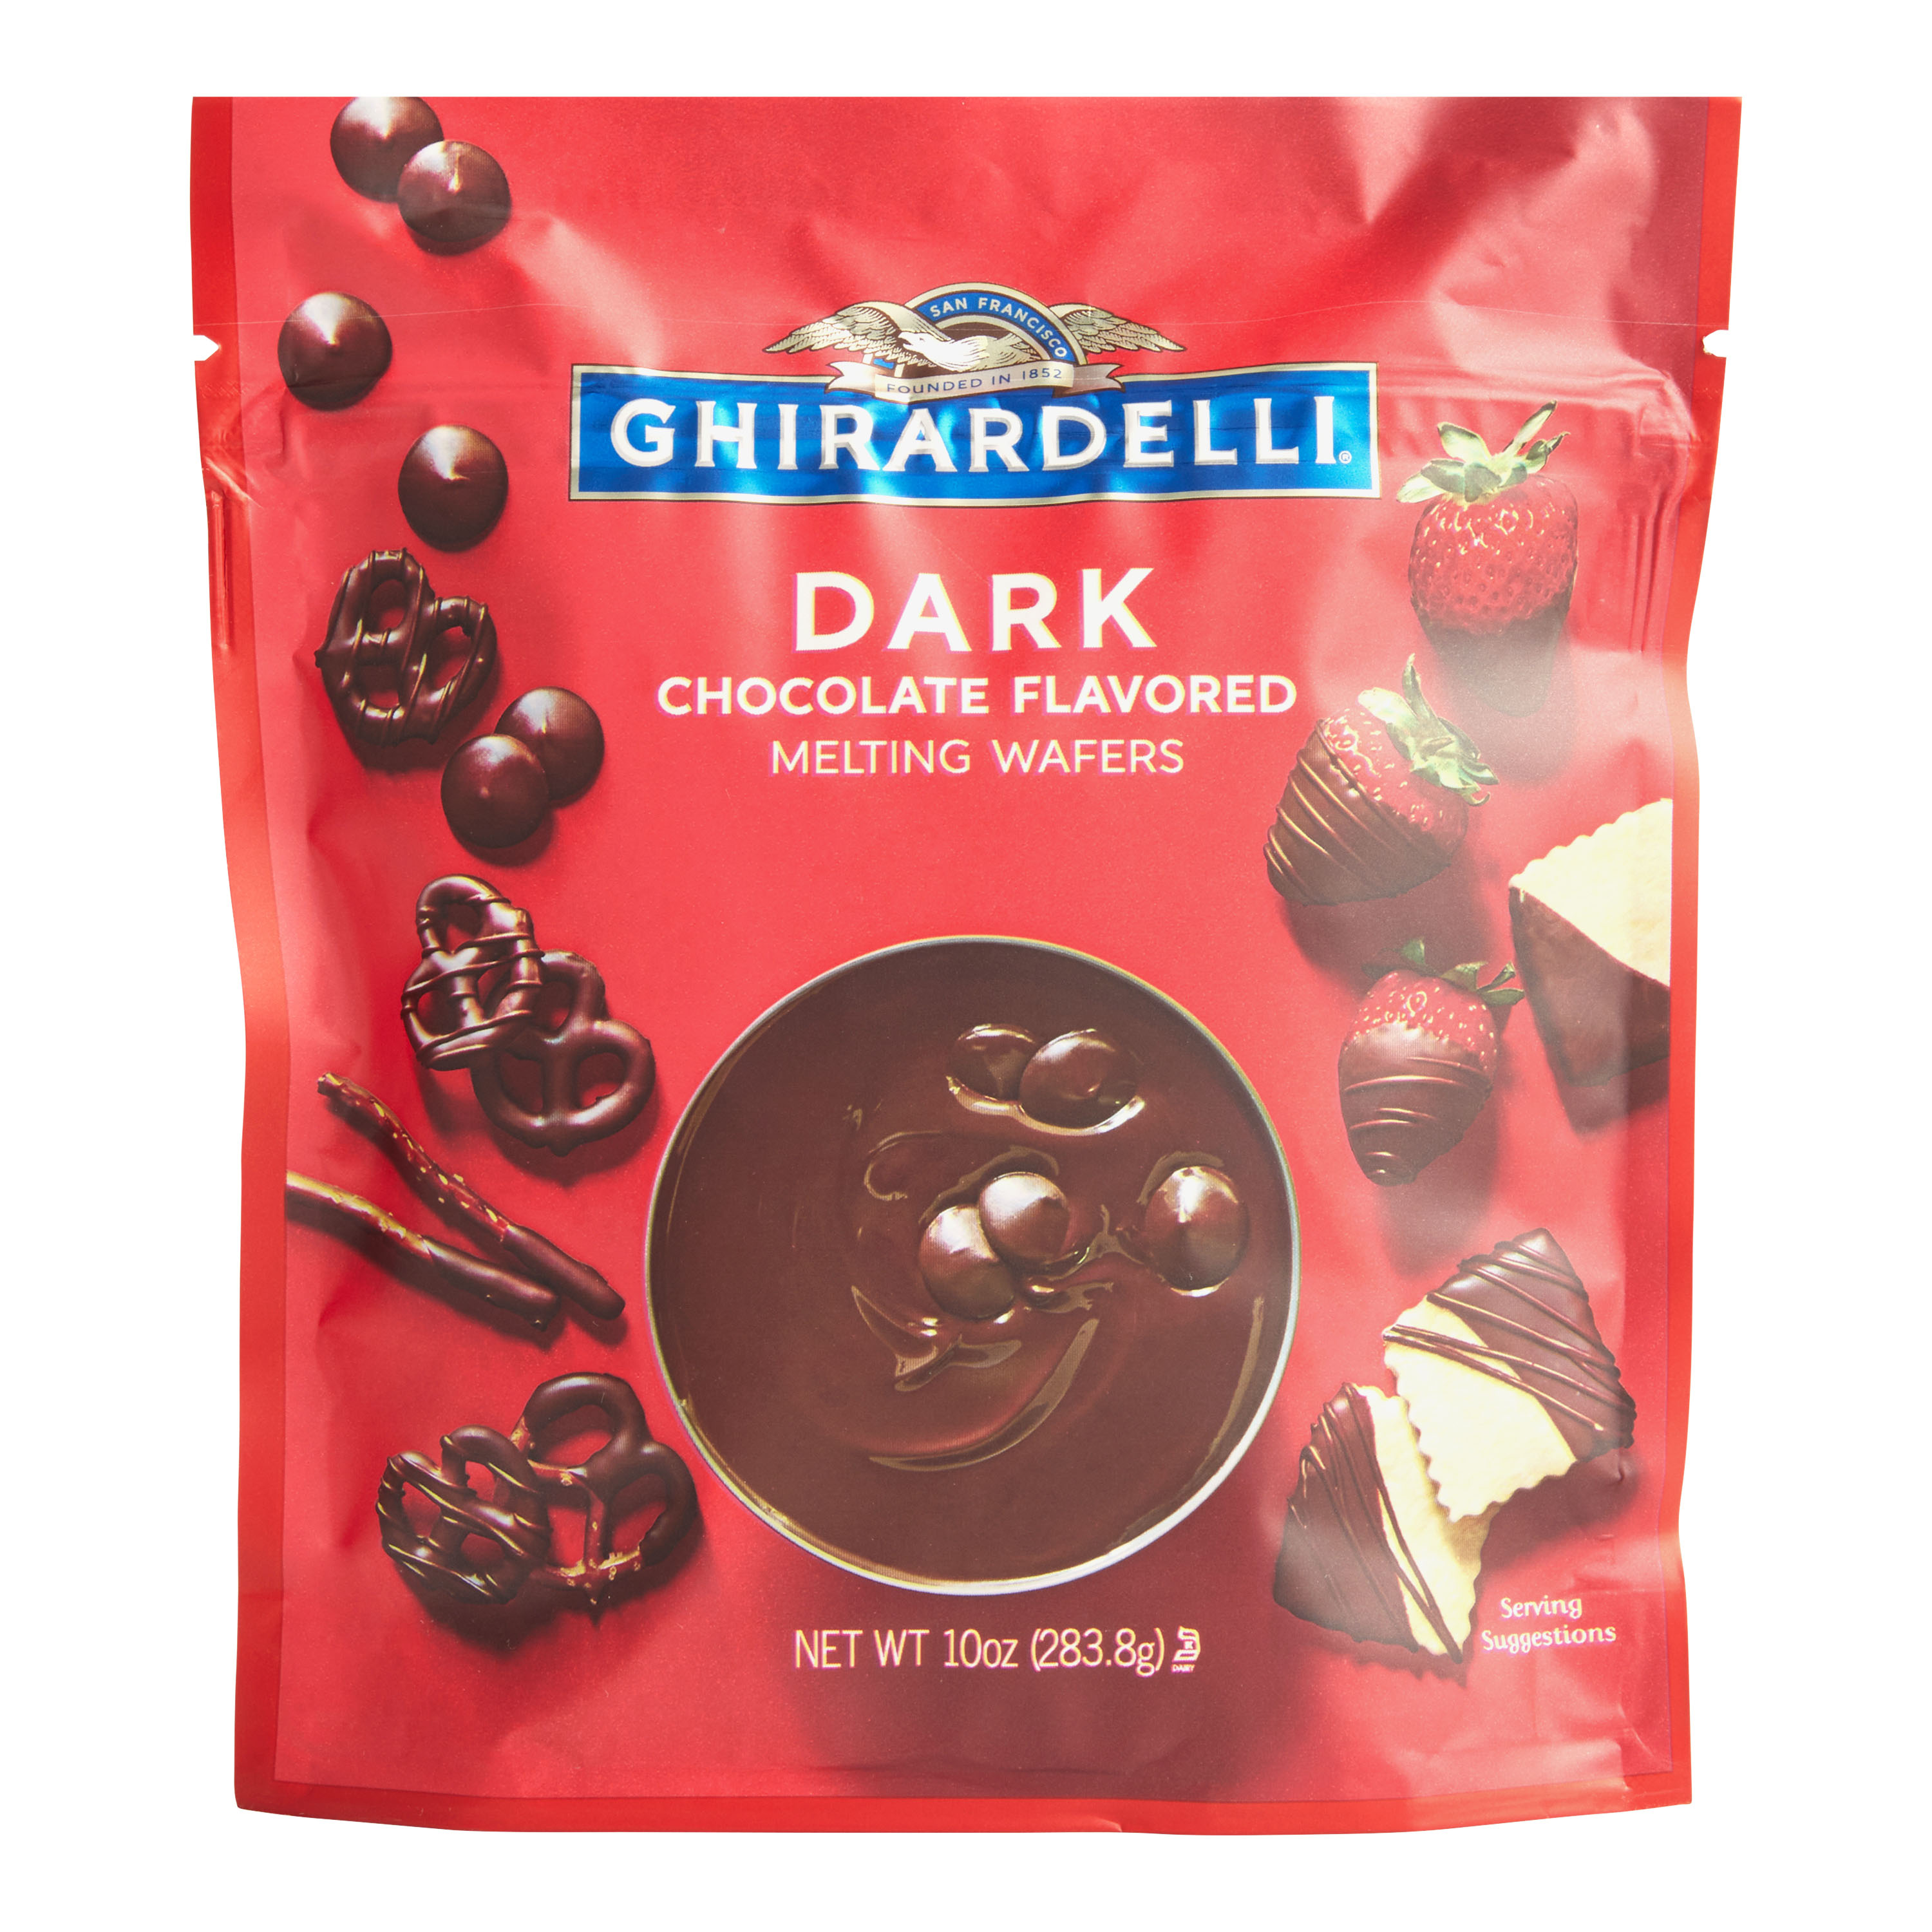 GHIRARDELLI Dark Chocolate Flavored Melting Wafers, 10 Oz Bag, Baking  Chips, Nuts & Bars